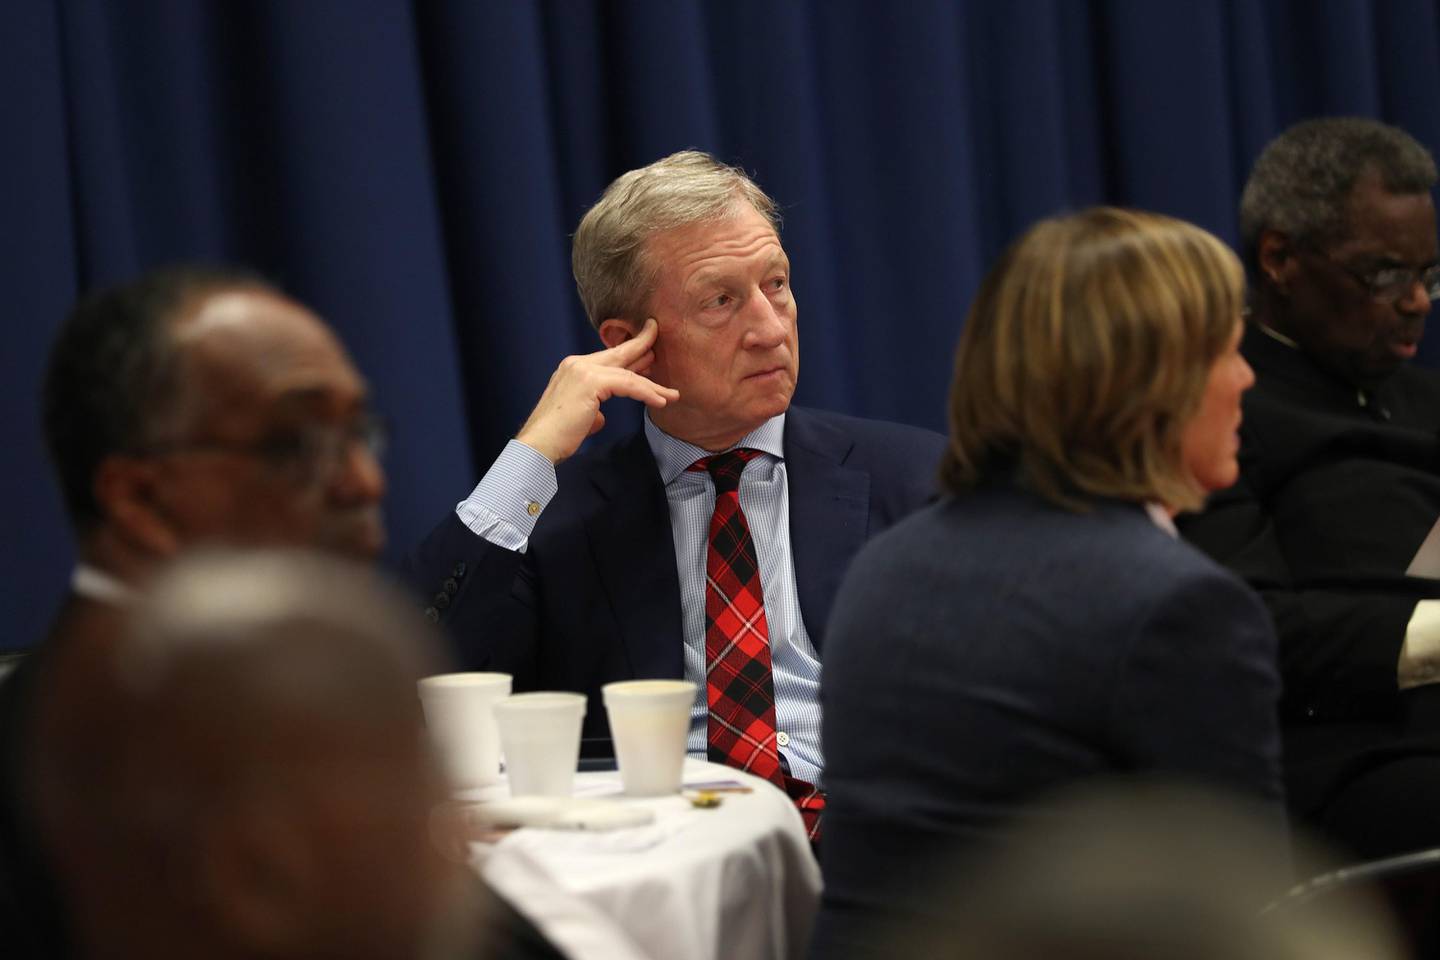 SELMA, AL - MARCH 01: Former Democratic presidential candidate Tom Steyer waits to speak during the Martin & Coretta S. King Unity Breakfast on March 1, 2020 in Selma, Alabama. Mr. Steyer announced he was dropping out of the race before Super Tuesday, March 3.   Joe Raedle/Getty Images/AFP
== FOR NEWSPAPERS, INTERNET, TELCOS & TELEVISION USE ONLY ==